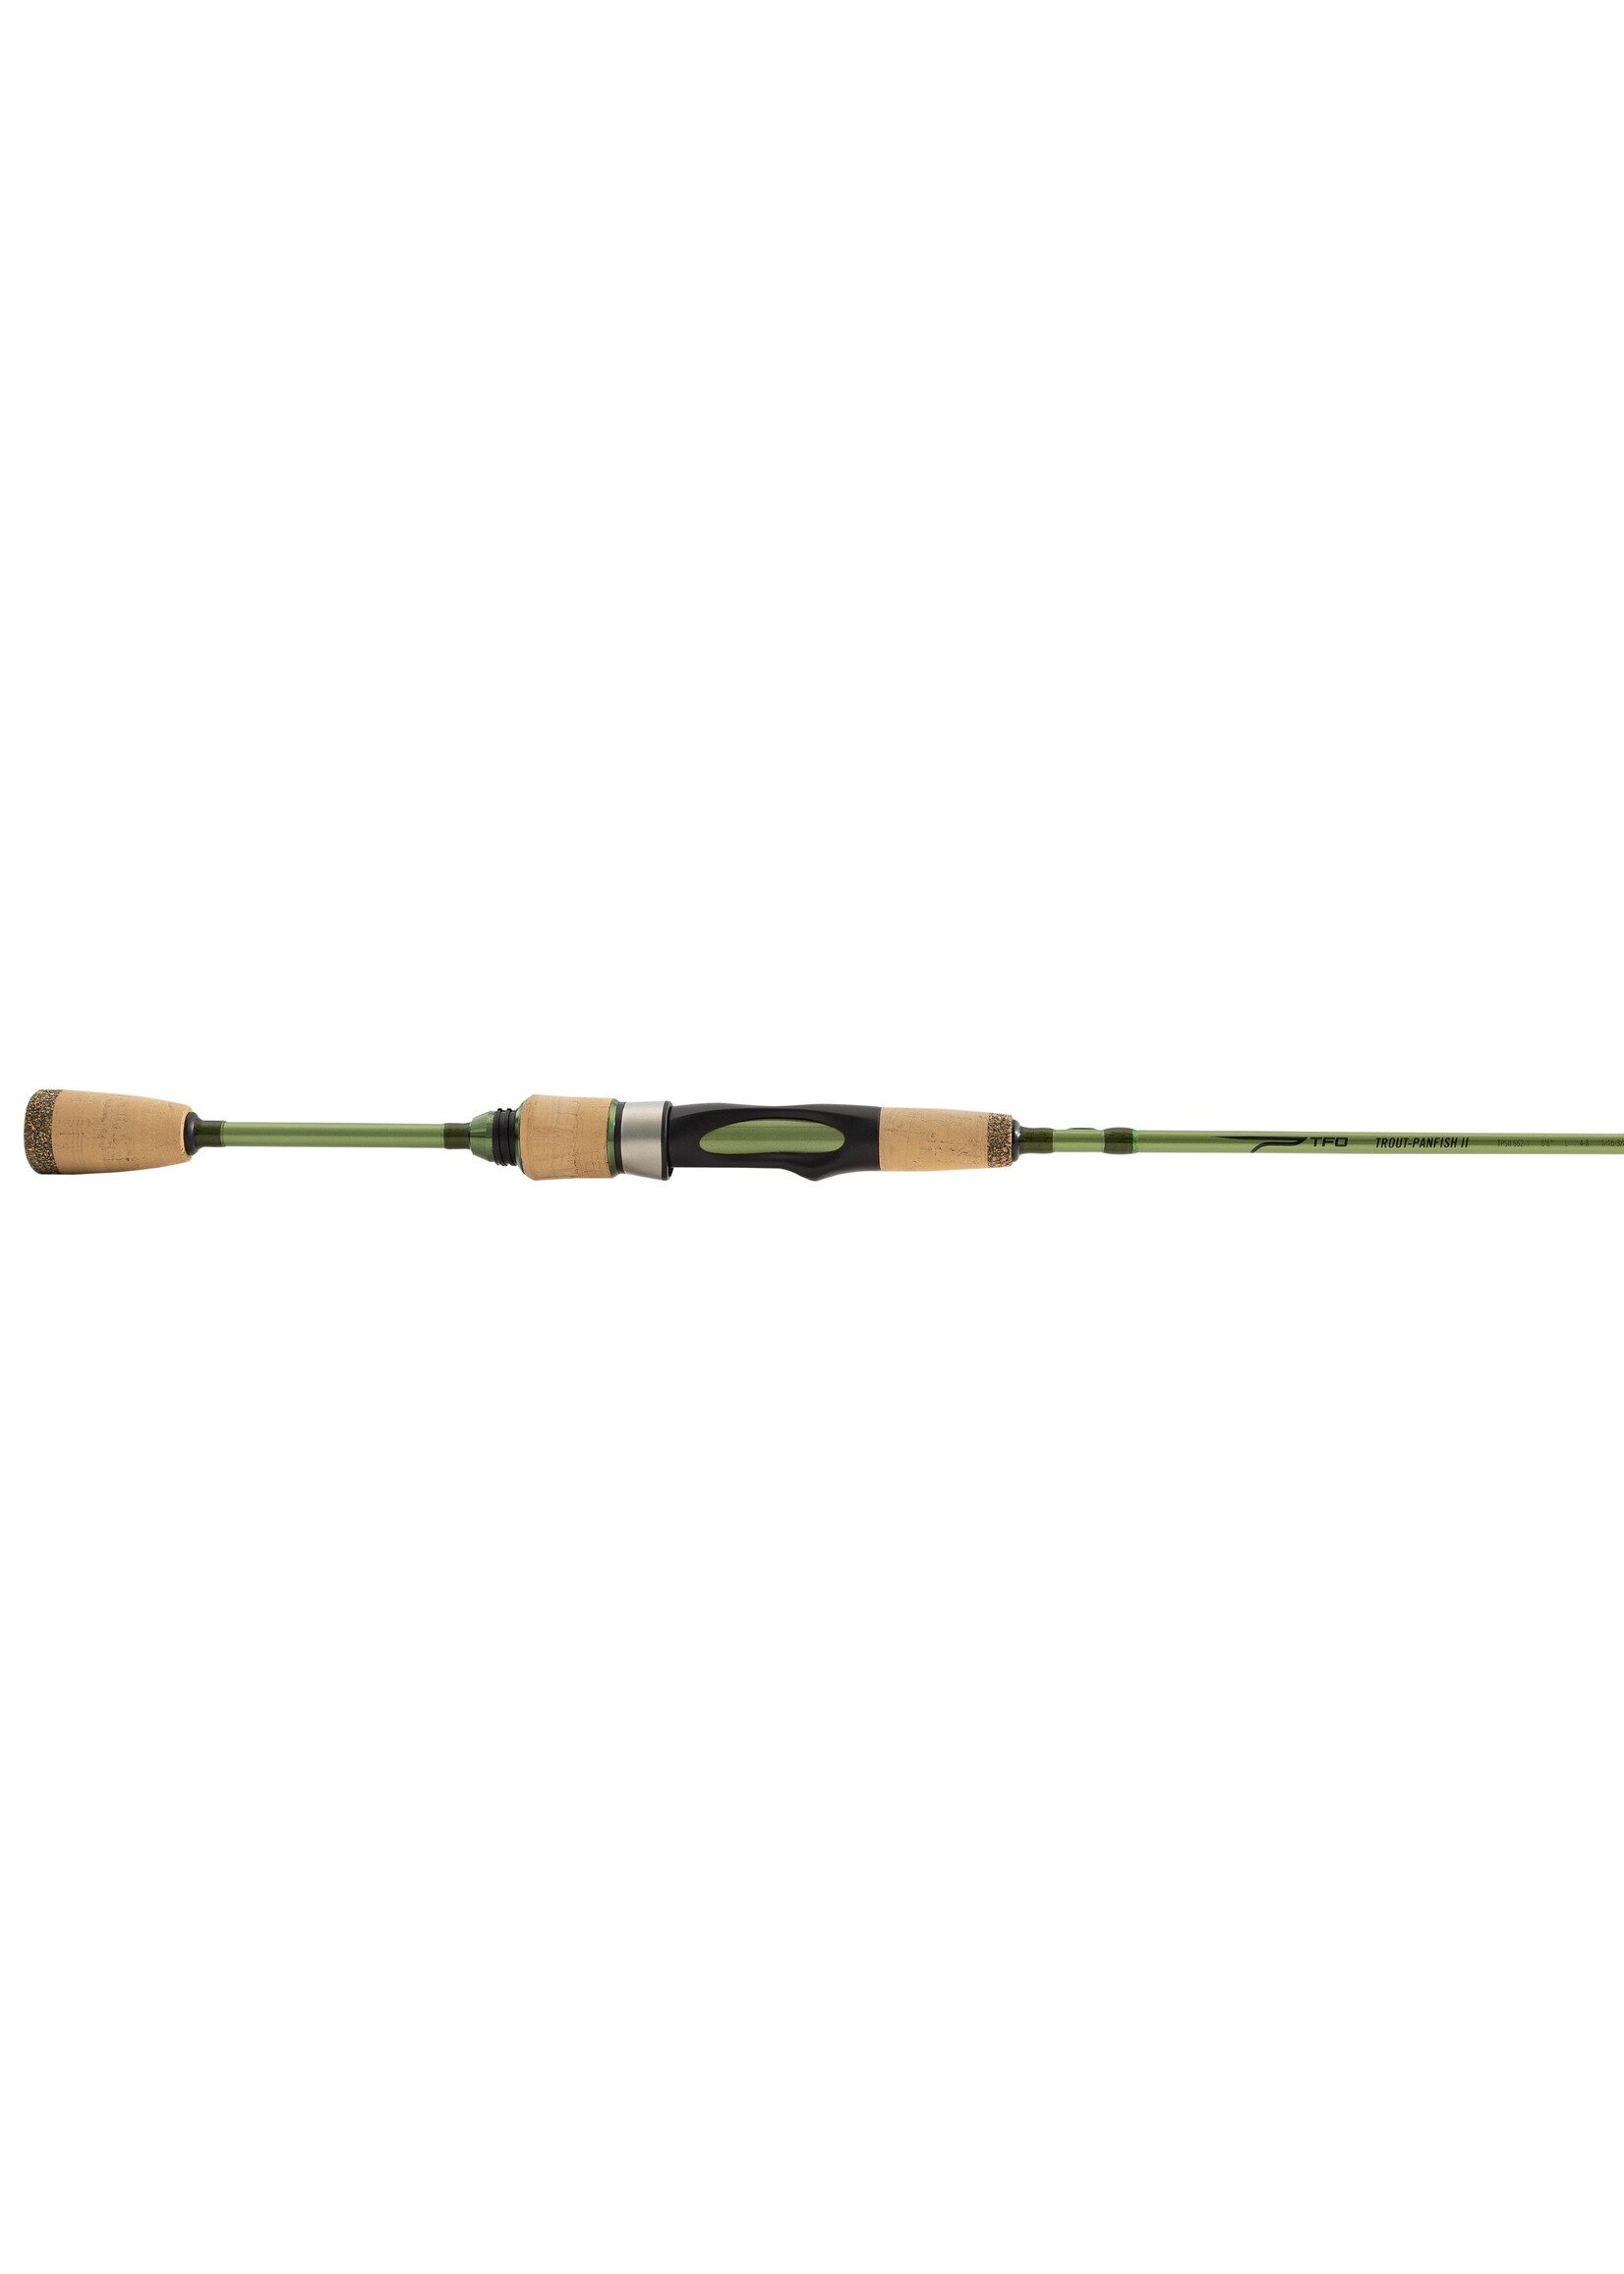 TFO Trout-Panfish II Spinning Rods - Tackle Shack